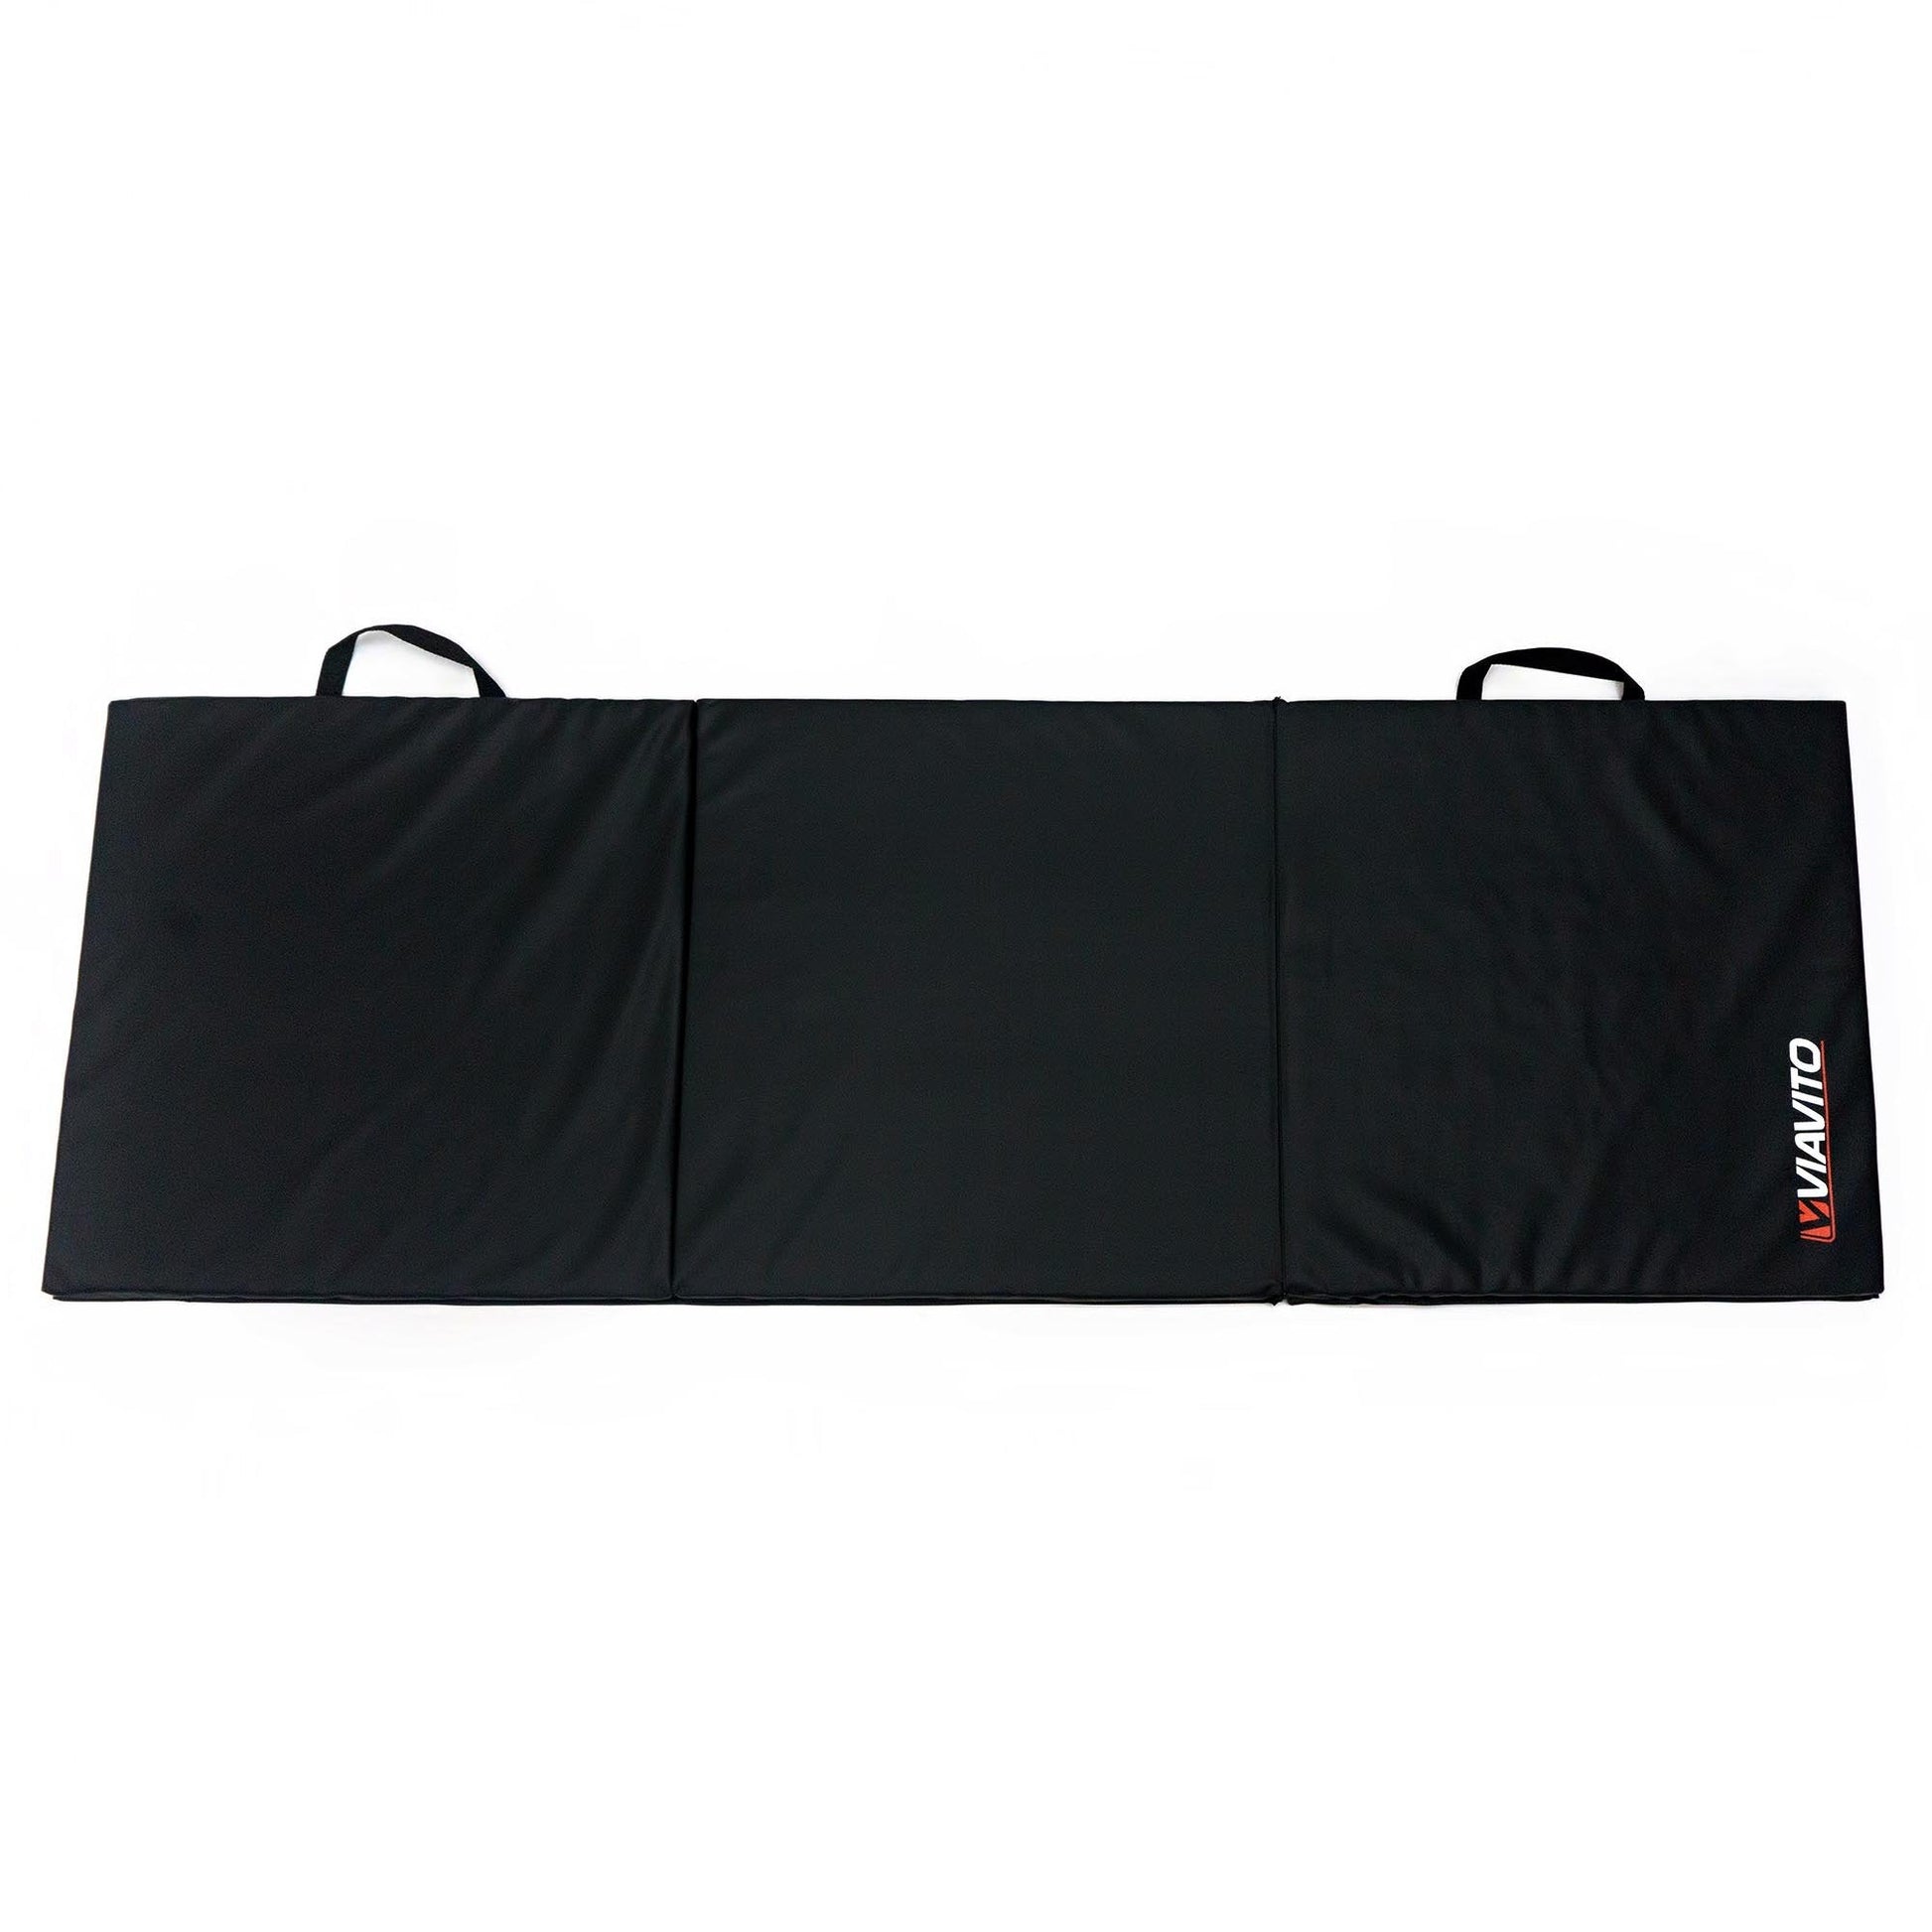 |Viavito Tri-Fold Exercise Mat with Handles - Unfodled |